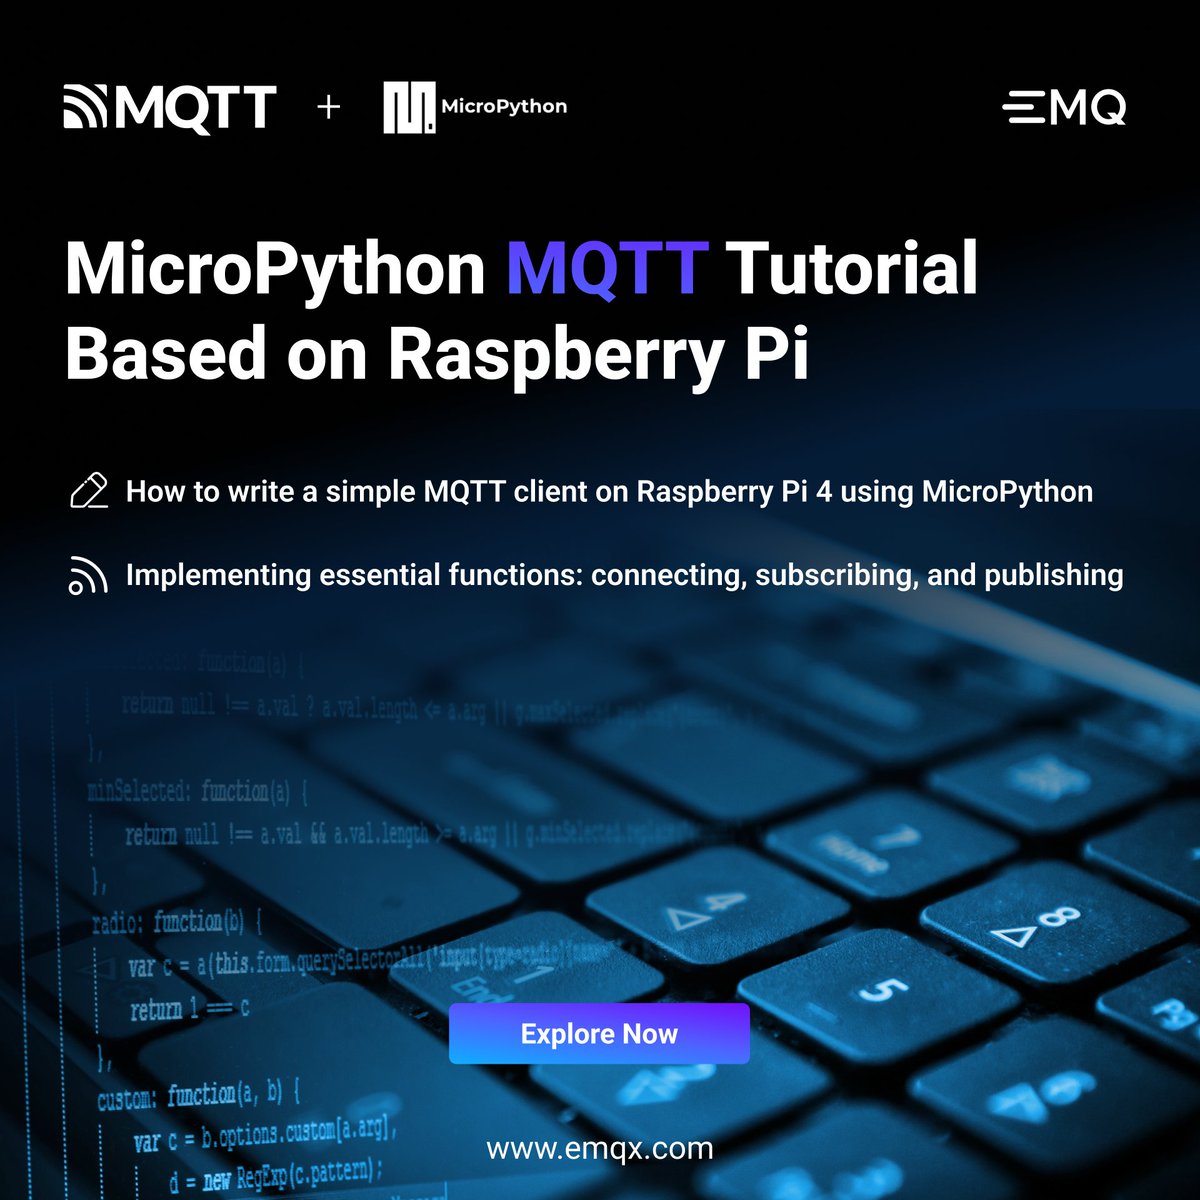 🤔 Are you looking to implement #MQTT protocol on your #RaspberryPi4 using MicroPython? We have got you covered! Explore how to connect, subscribe, and publish with MQTT broker using simple #MicroPython scripts.

Follow us for more updates on #IoTTech! 👉
 social.emqx.com/u/JW8pKv